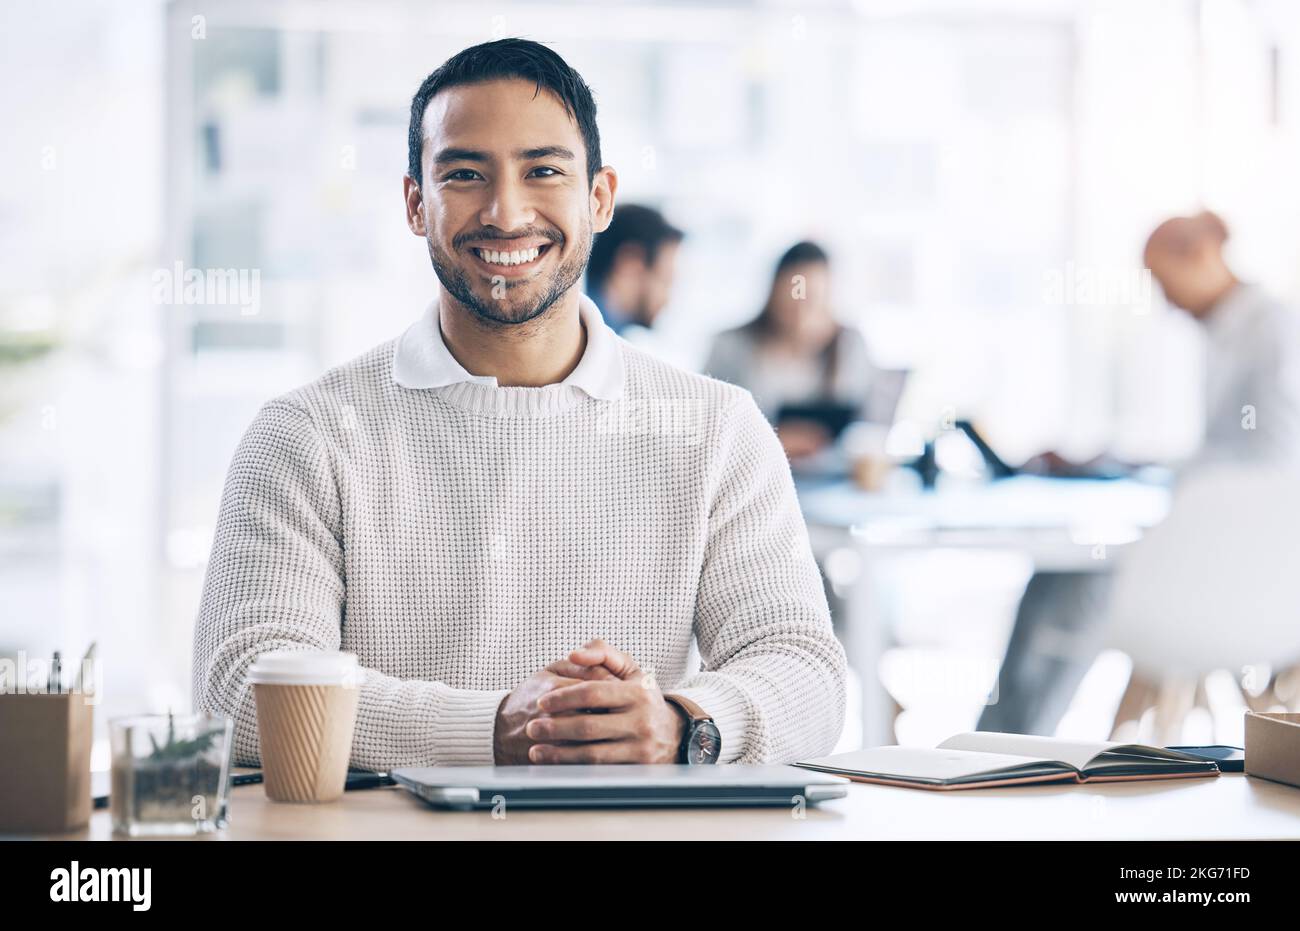 Smile, marketing and businessman happy in a coworking office at a corporate agency. Ready, excited and portrait of an employee working at a desk with Stock Photo